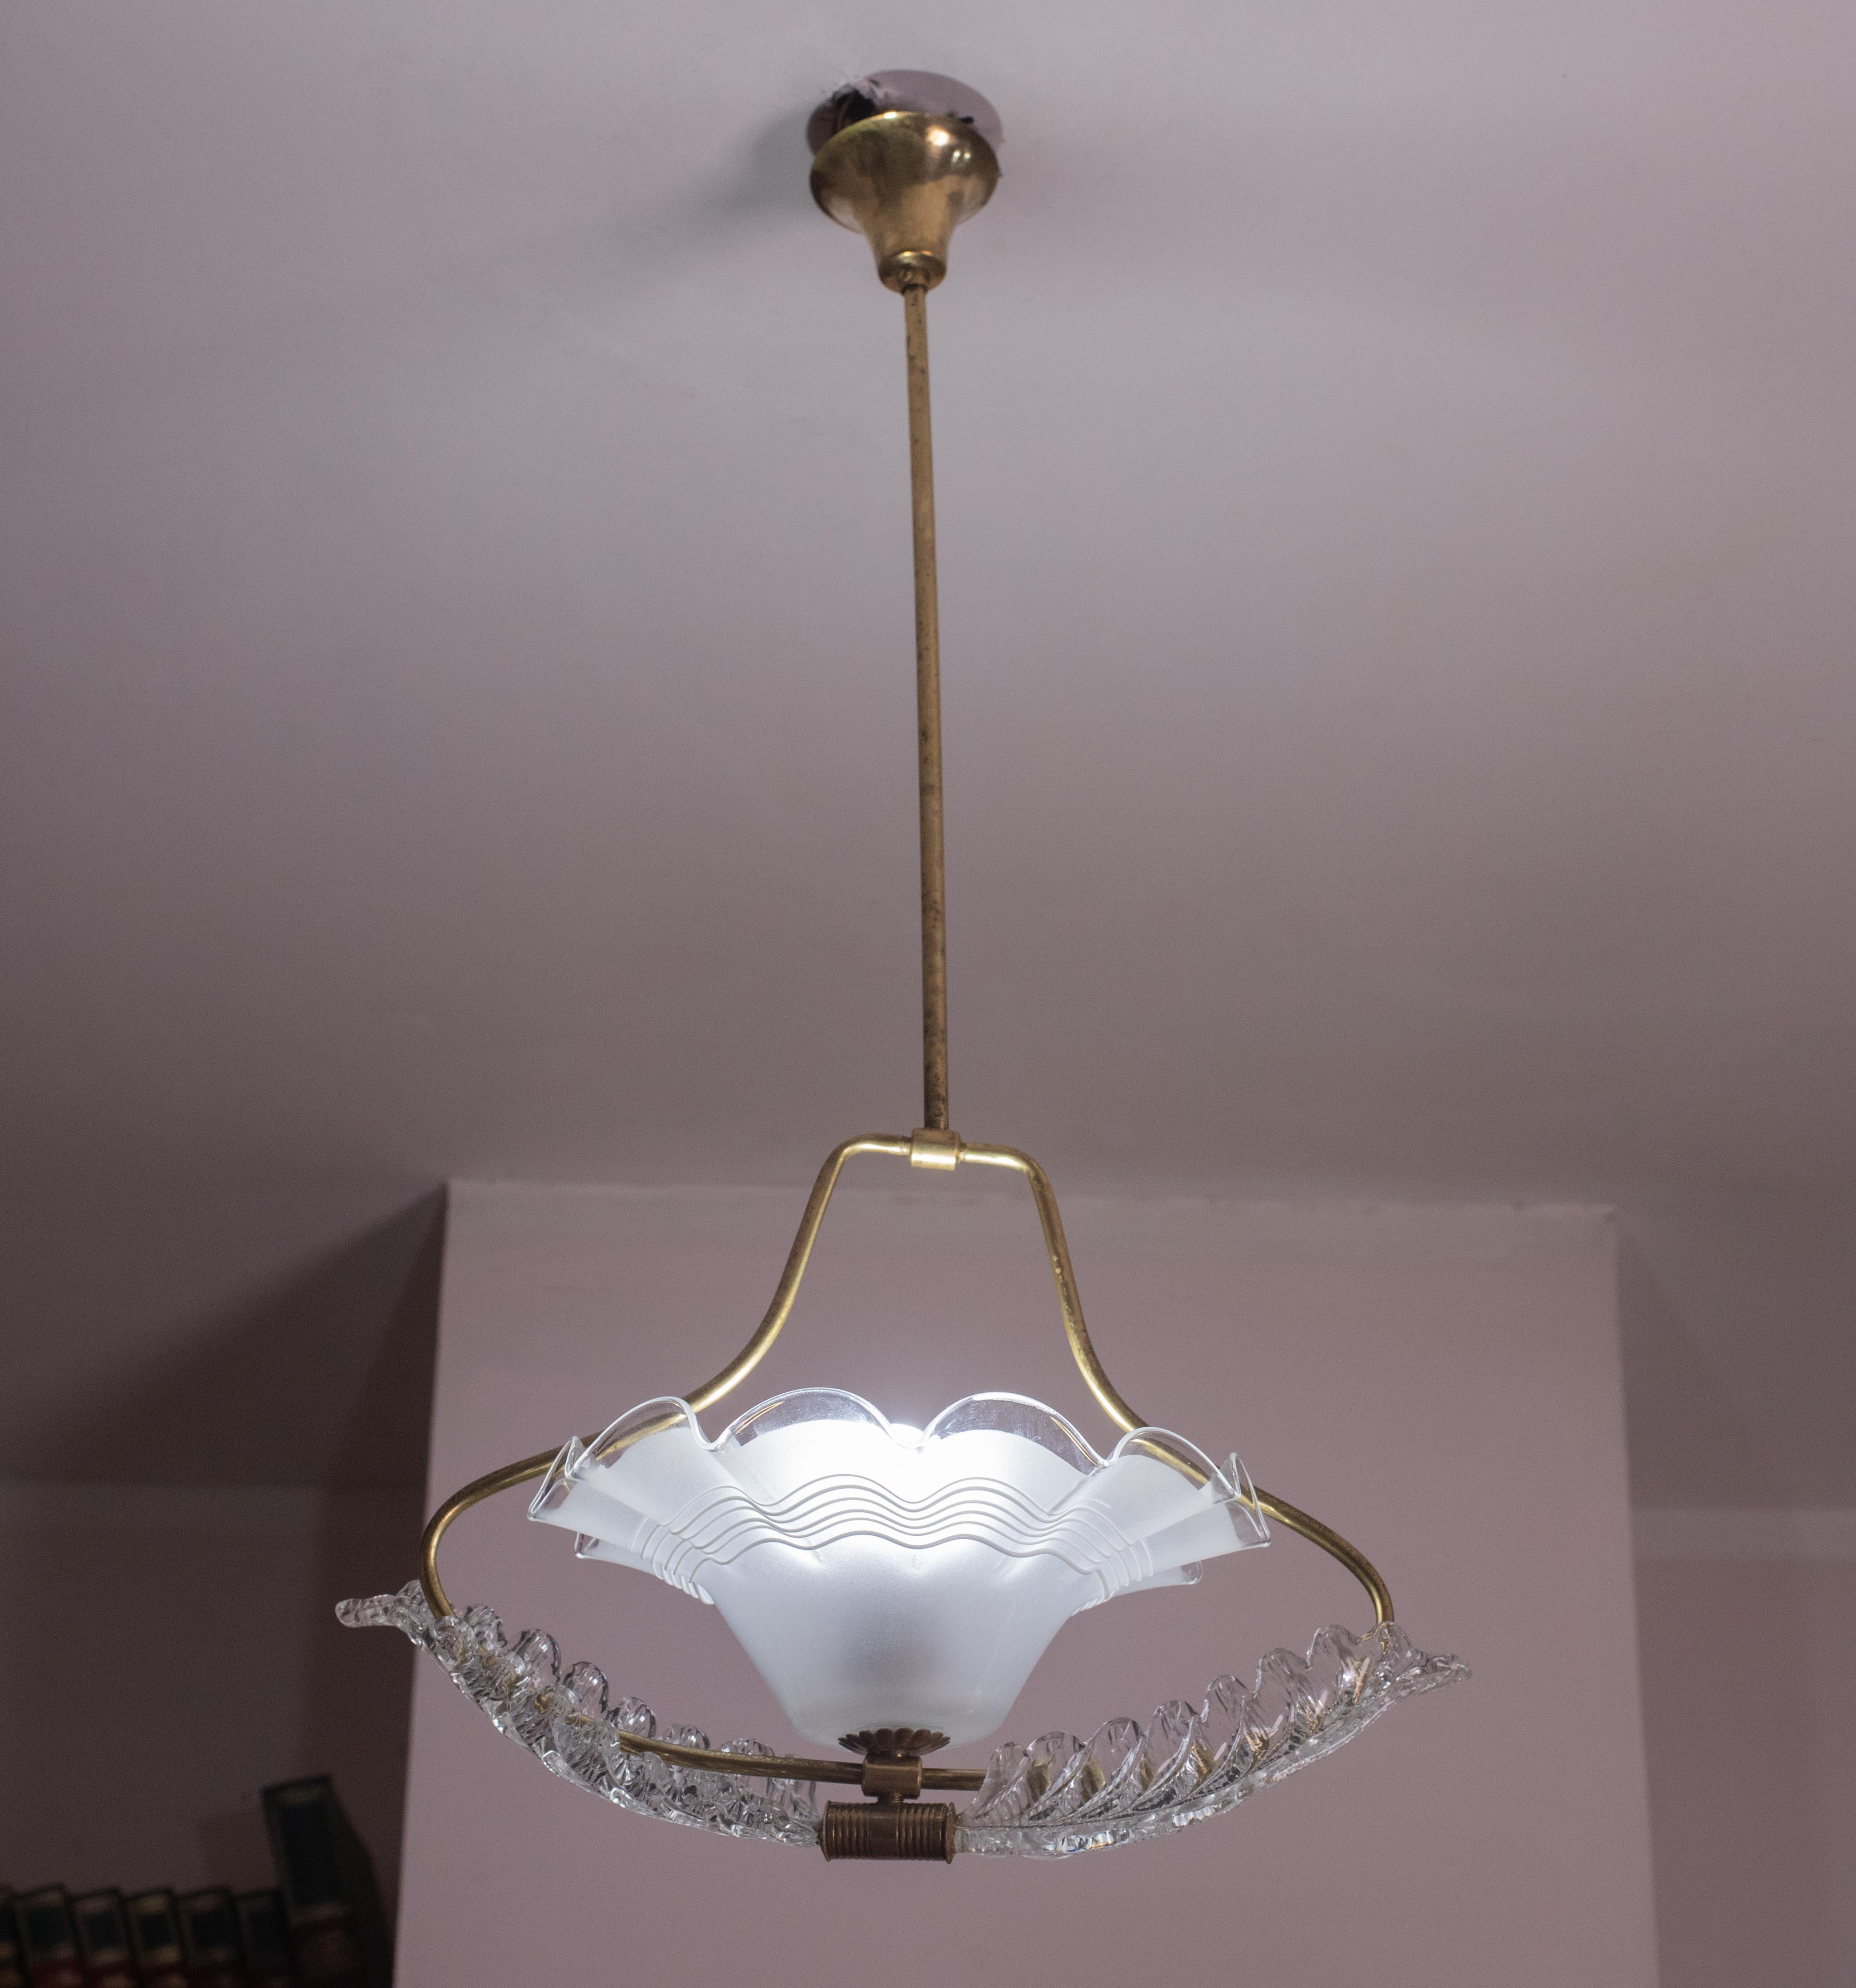 Stunning Art Deco style pendant made by the Barovier & Toso glassworks in the 1940s-1950s.
The chandelier is 80 cm tall with the rod, 40 cm in diameter.
It mounts one E27 light. 
The chandelier consists of 3 glass elements.
The glass, steel